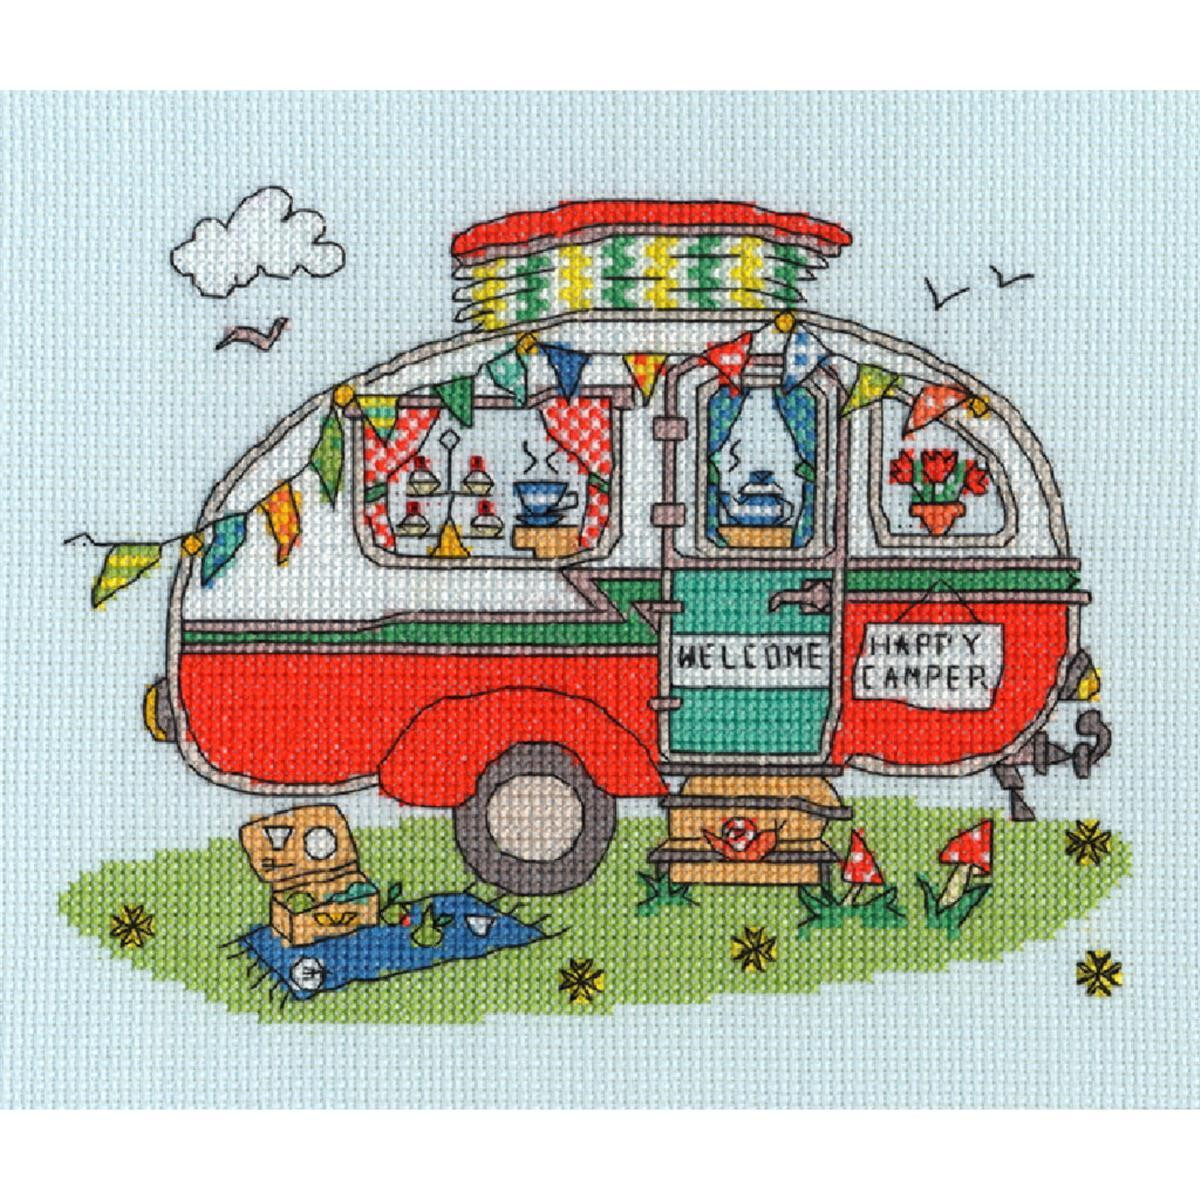 A colorful cross stitch embroidery pack of a red and...